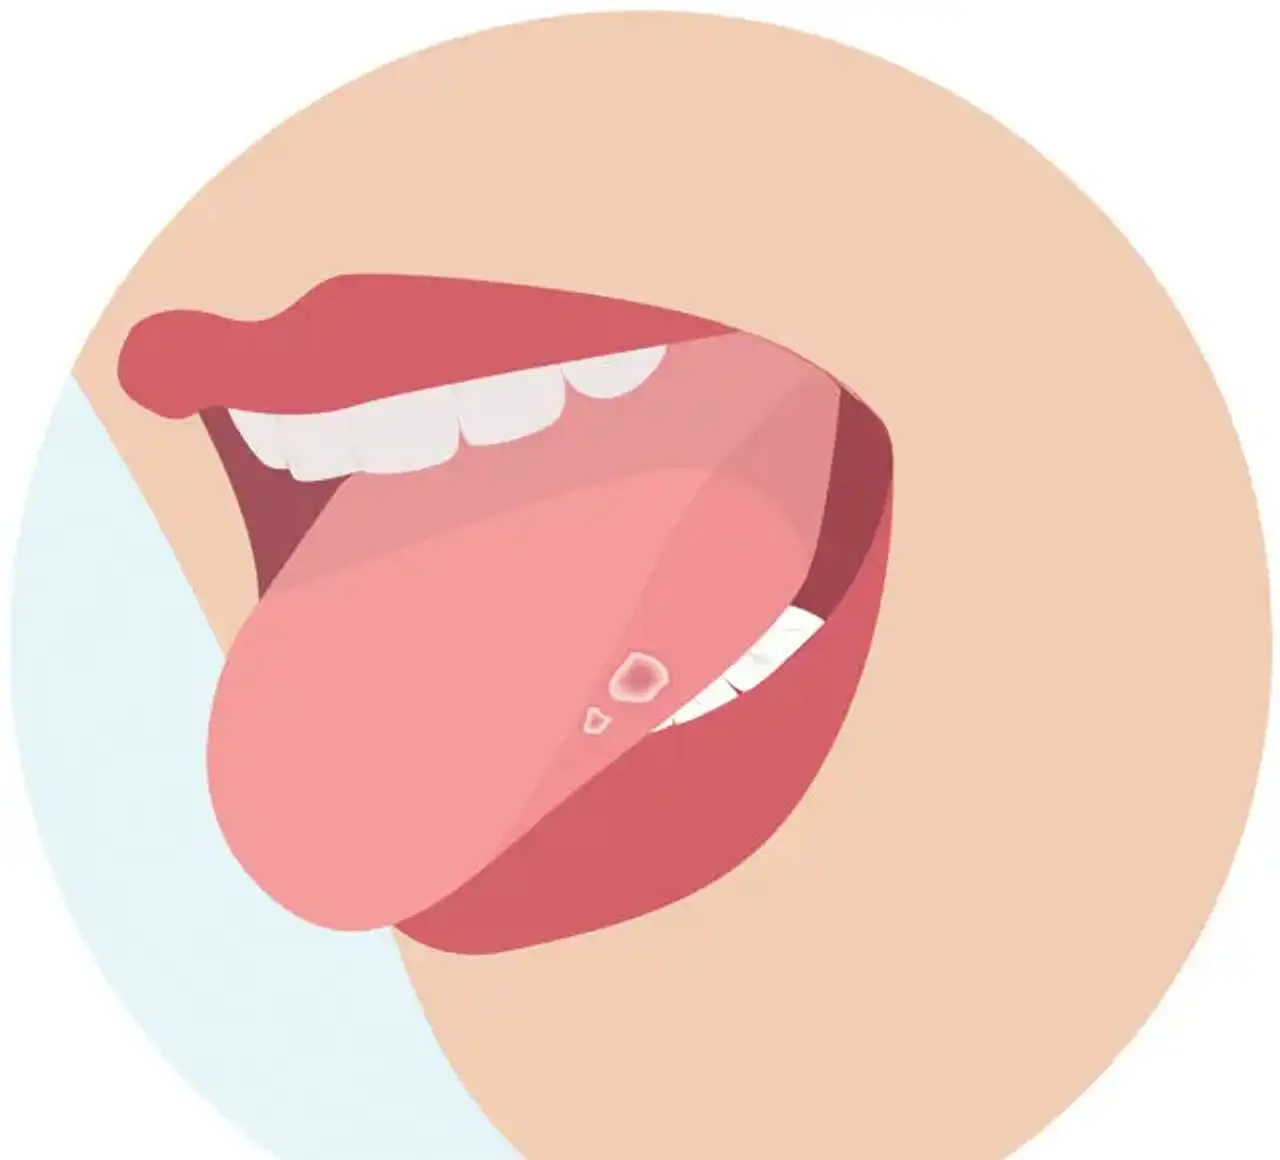 Canker sore on tongue